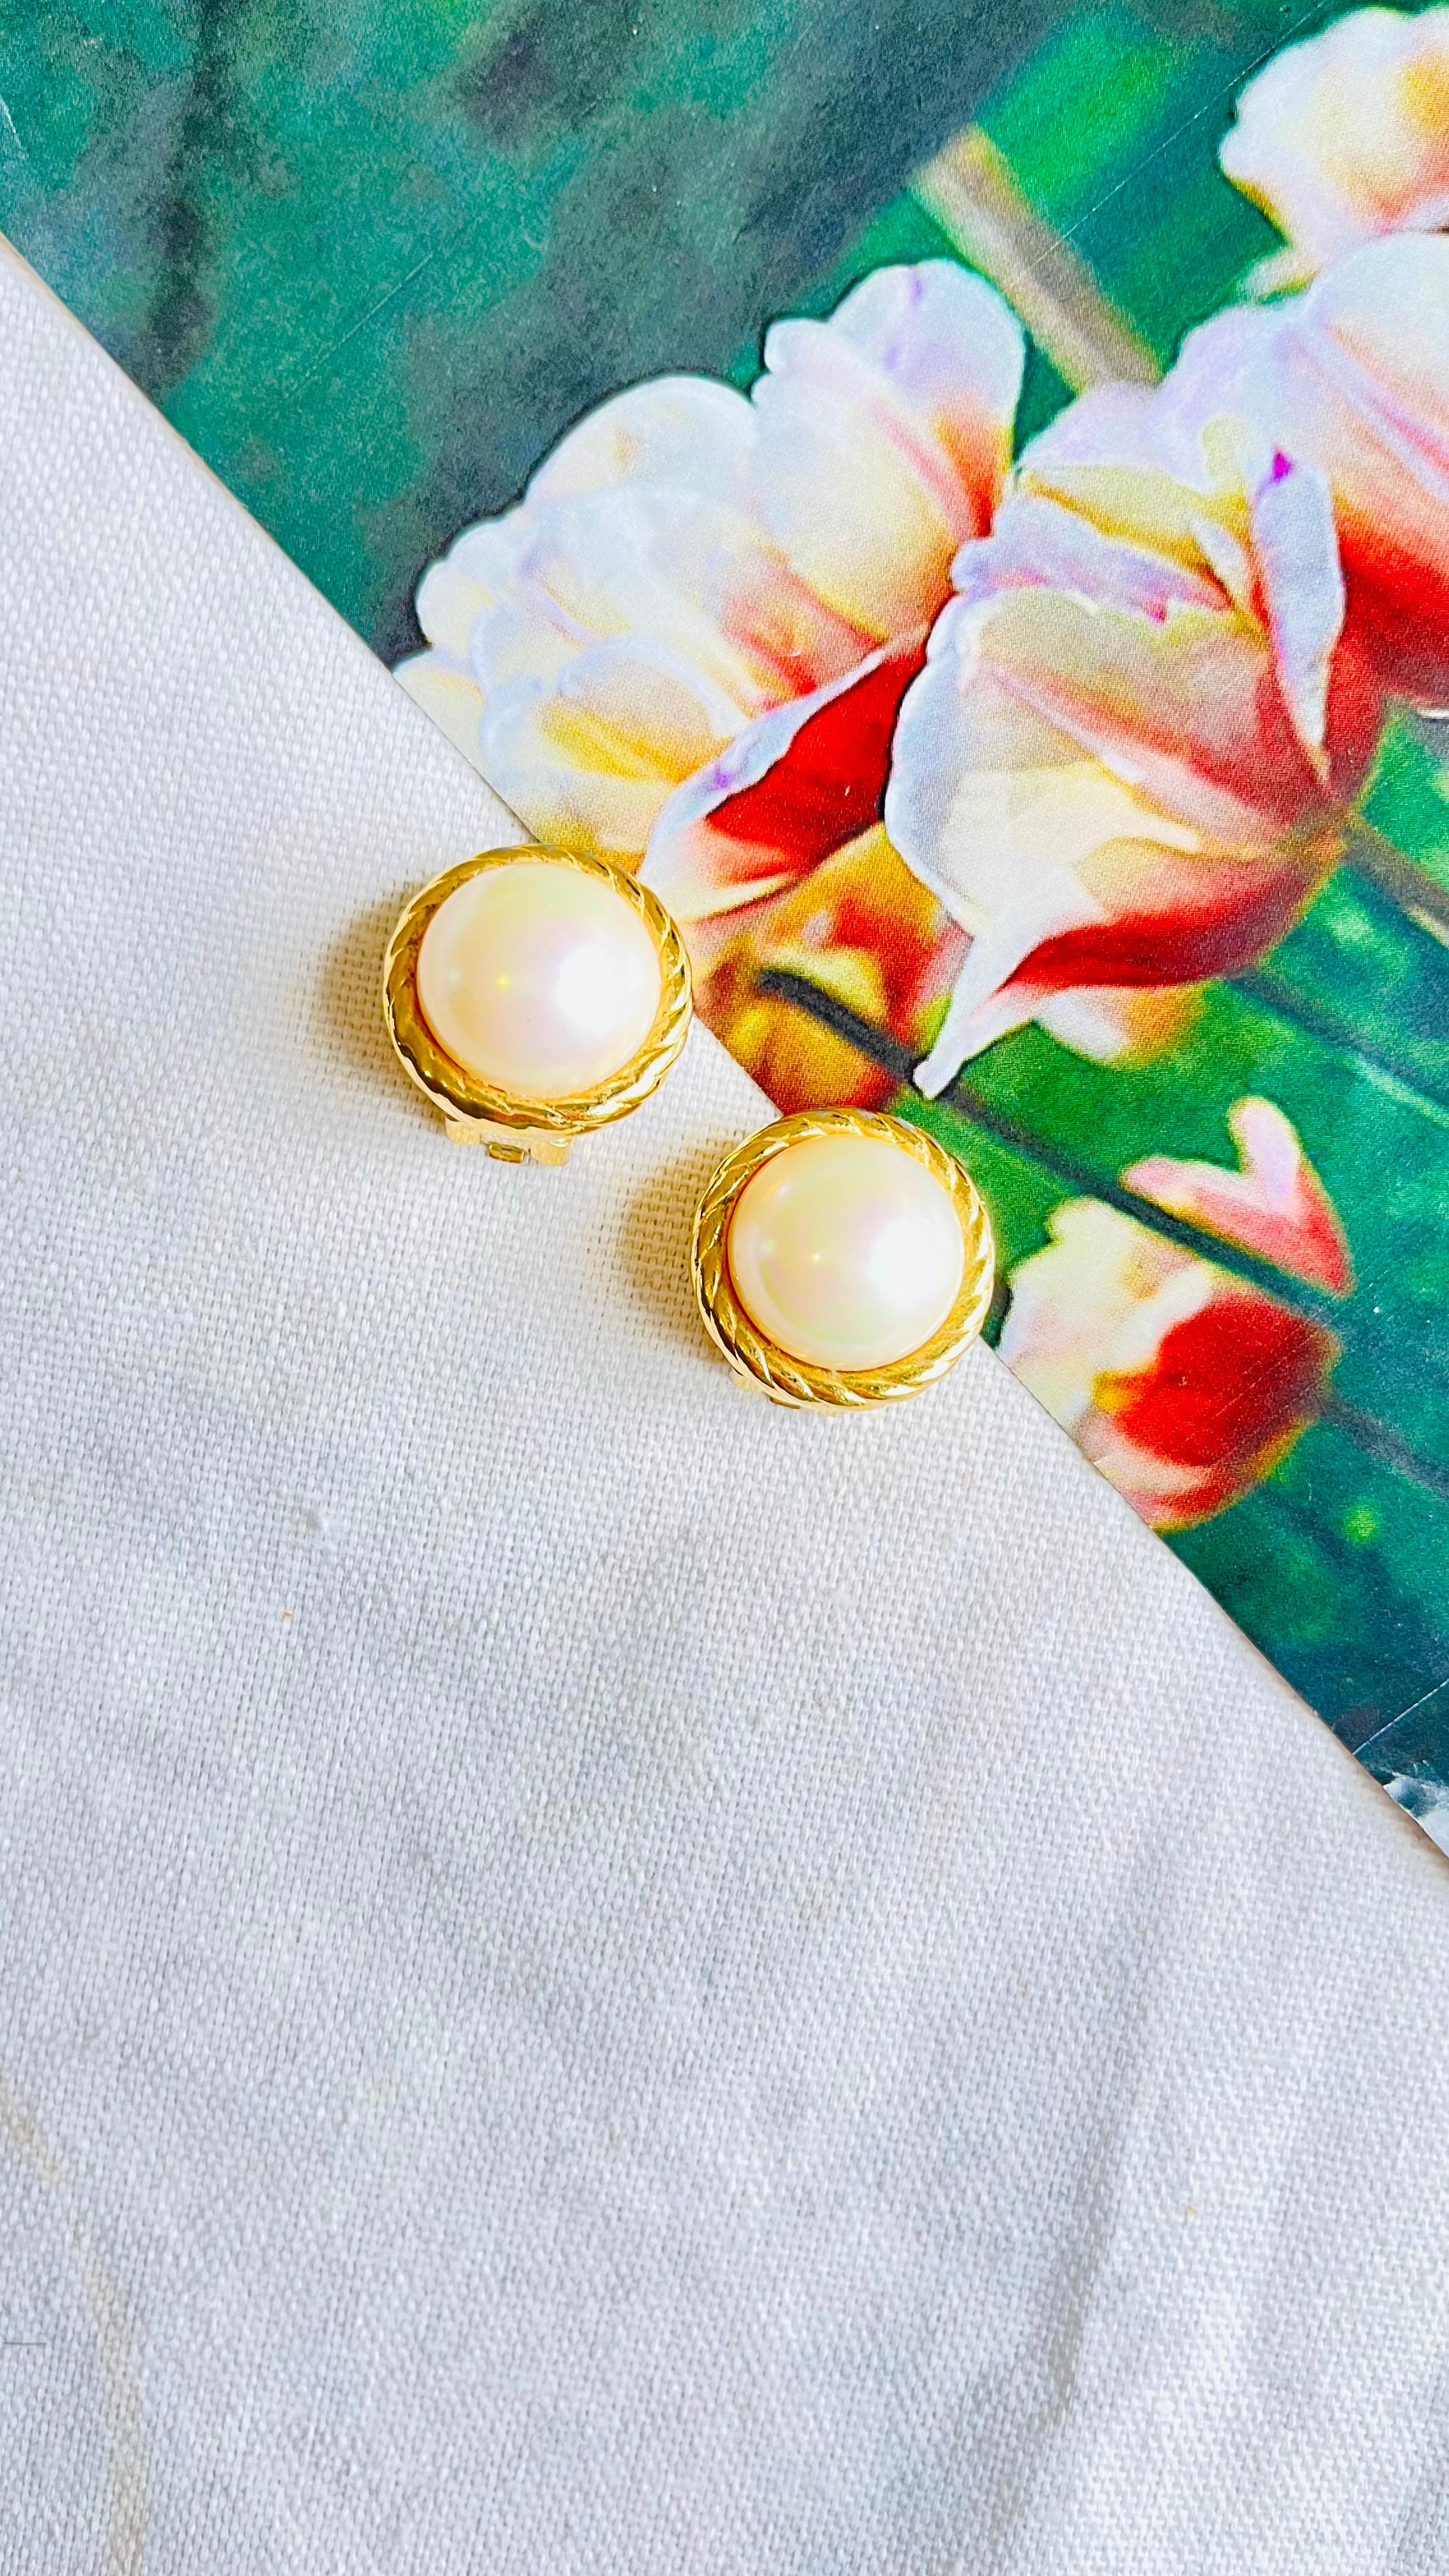 Very excellent condition. 100% Genuine.

A very beautiful pair of faux pearl earrings by Chr. DIOR, signed at the back.

Size: 2.1*2.1 cm.

Weight: 10.0 g/each.

_ _ _

Great for everyday wear. Come with velvet pouch and beautiful package.

Makes